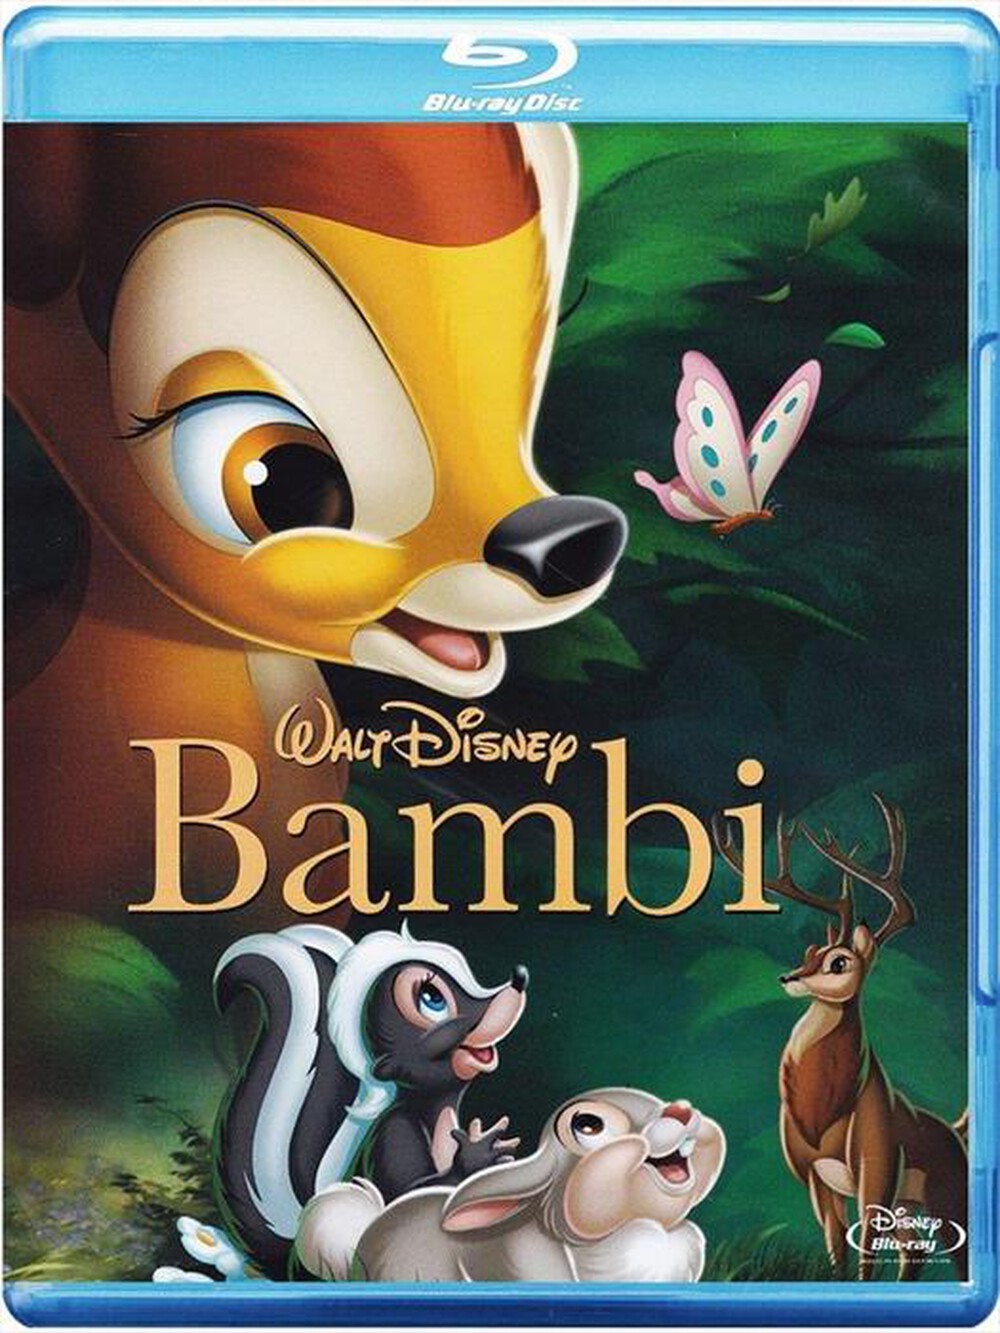 "EAGLE PICTURES - Bambi"